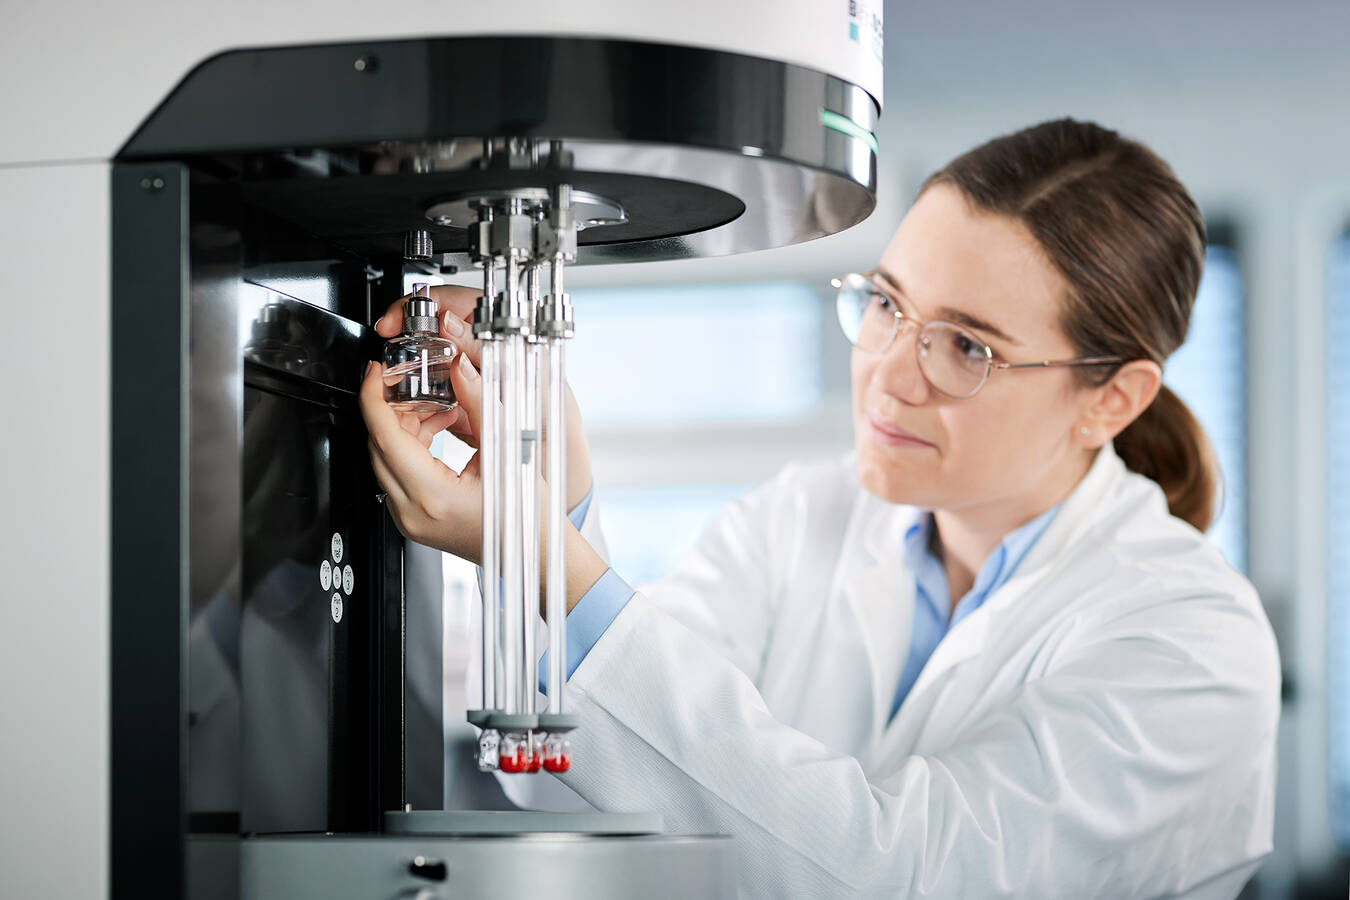 Maximize Your Sorption Analysis Optimize your lab space, accuracy and flexibility with Microtrac’s BELSORP MAX X, the latest model in the BELSORP MAX series. 